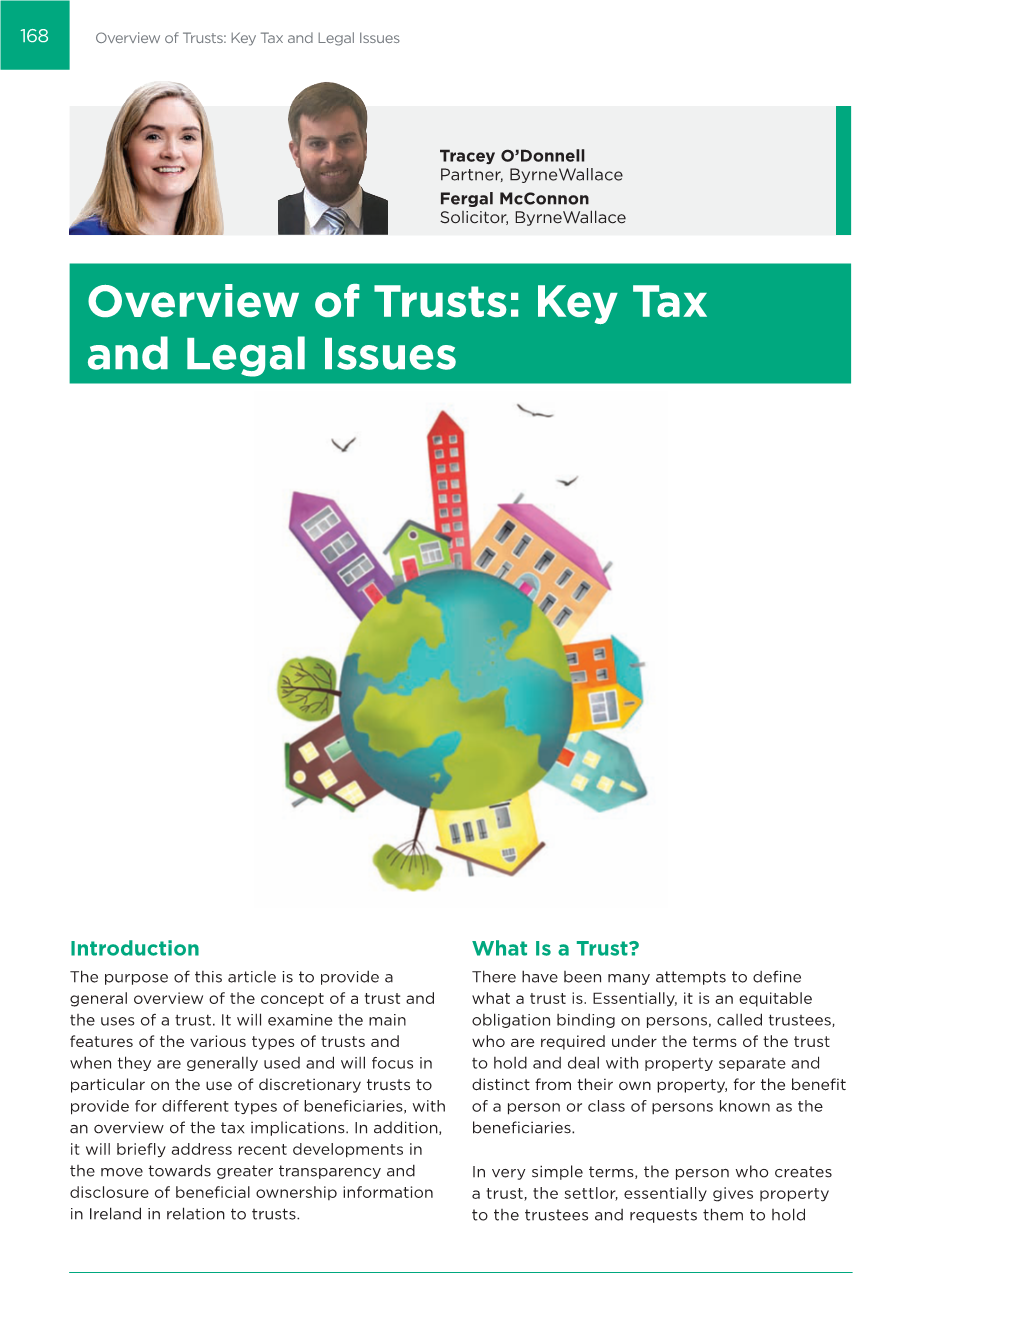 Overview of Trusts: Key Tax and Legal Issues